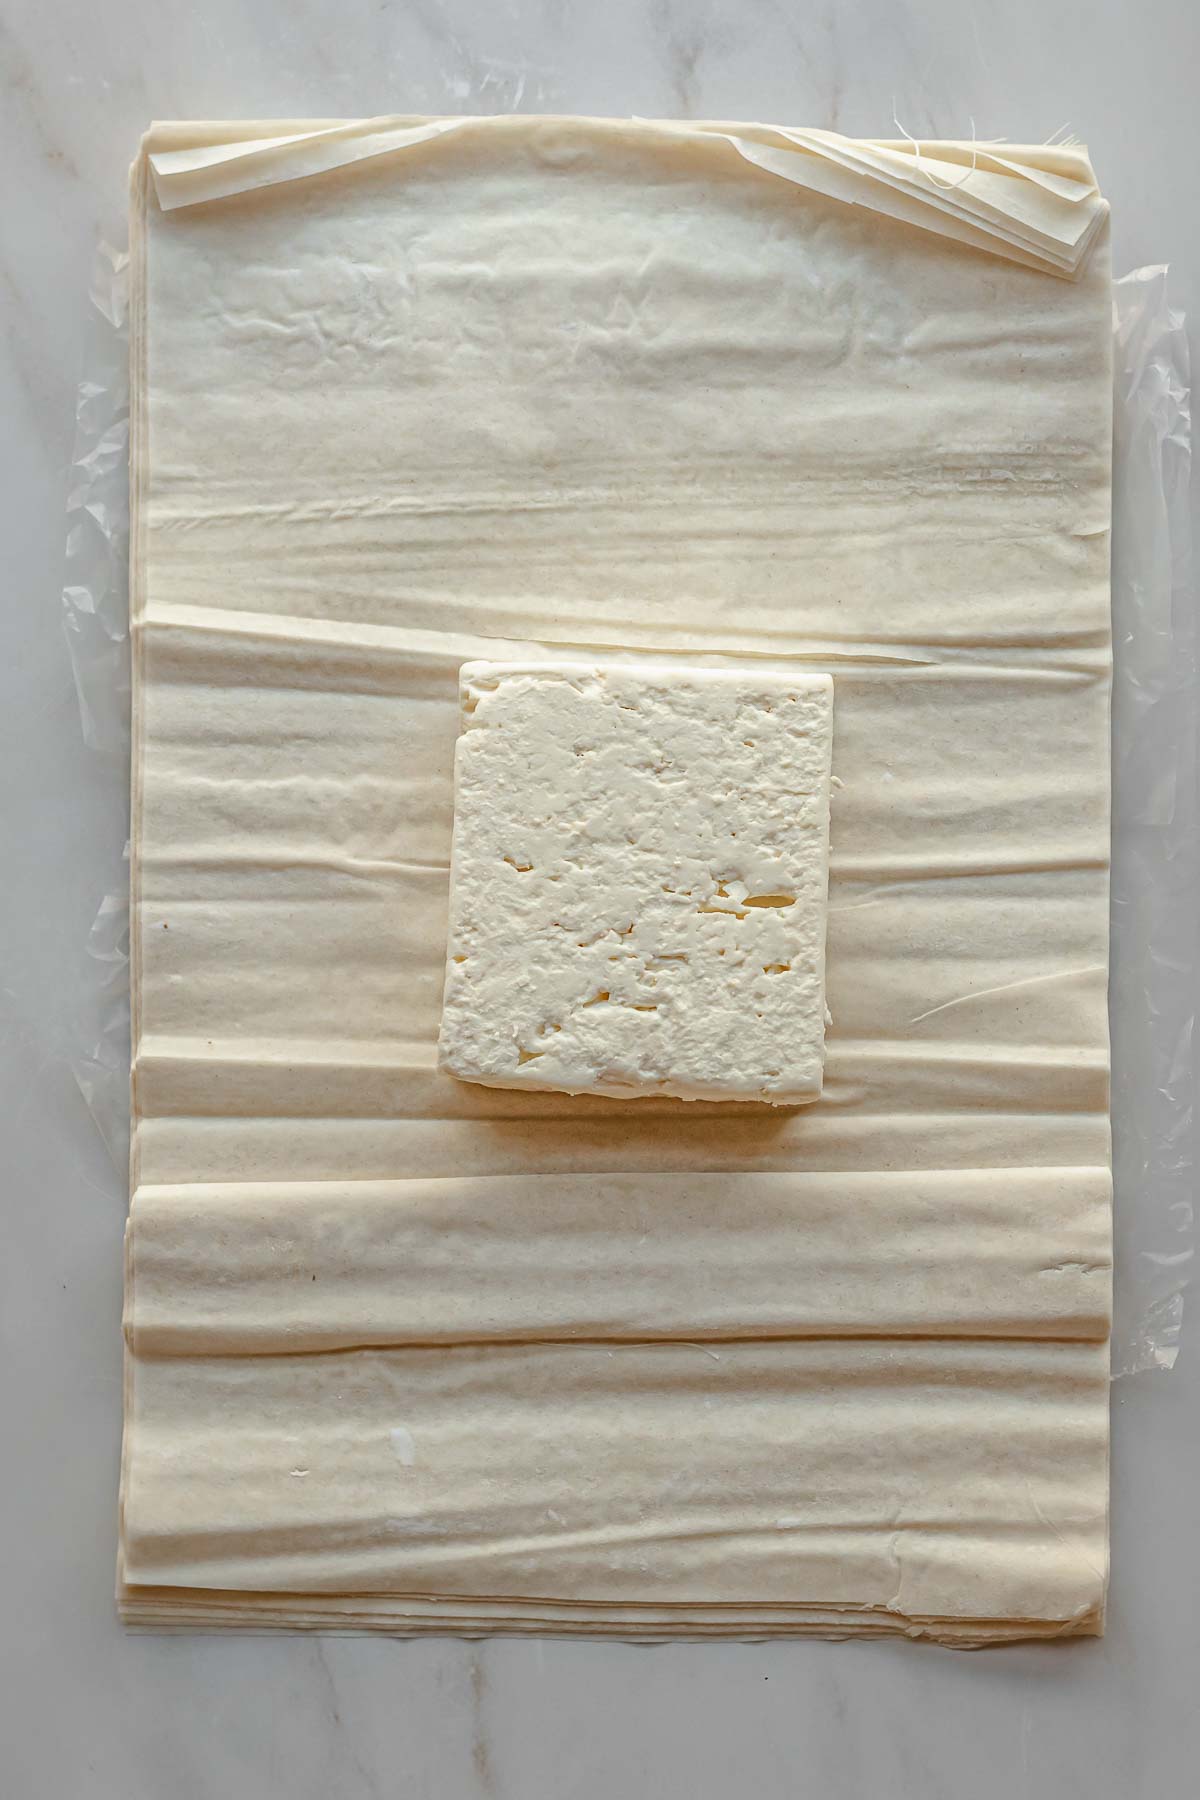 A block of feta cheese on phyllo pastry.